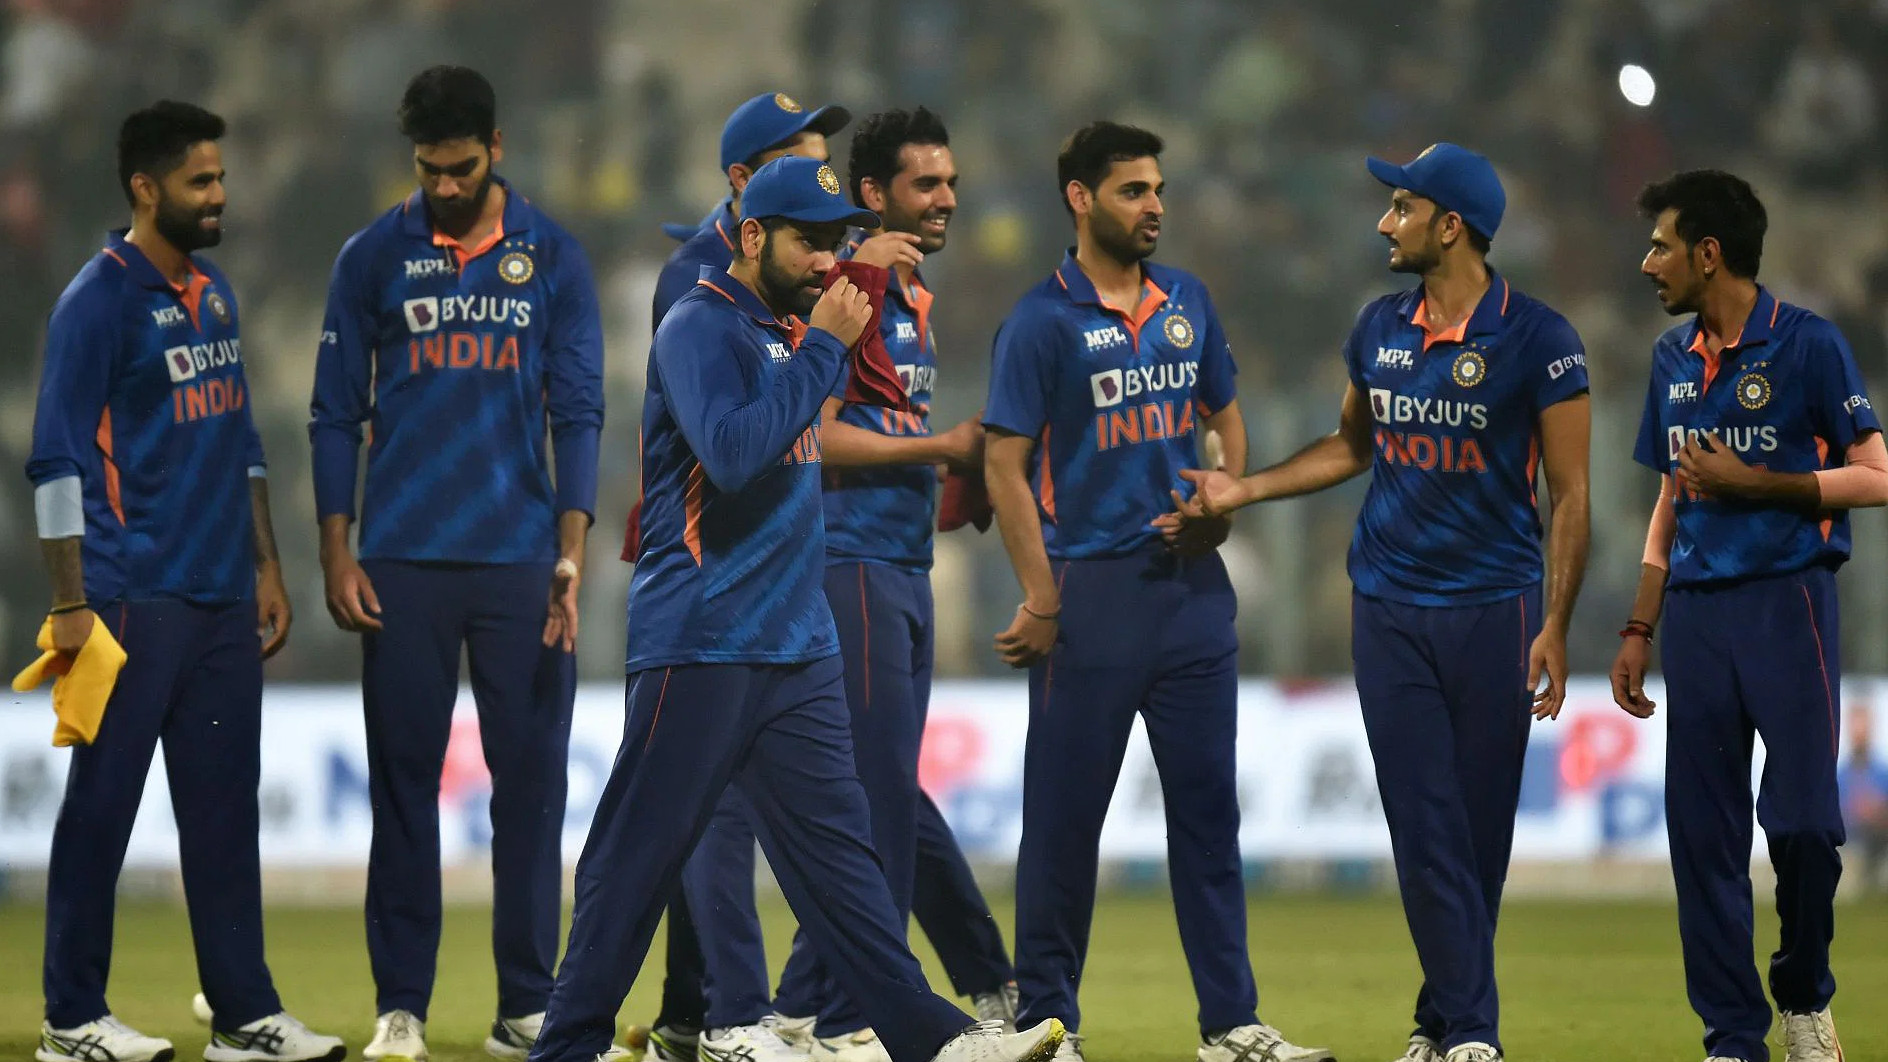 ENG v IND 2022: BCCI names two India different squads for England T20Is; ODI squad also announced